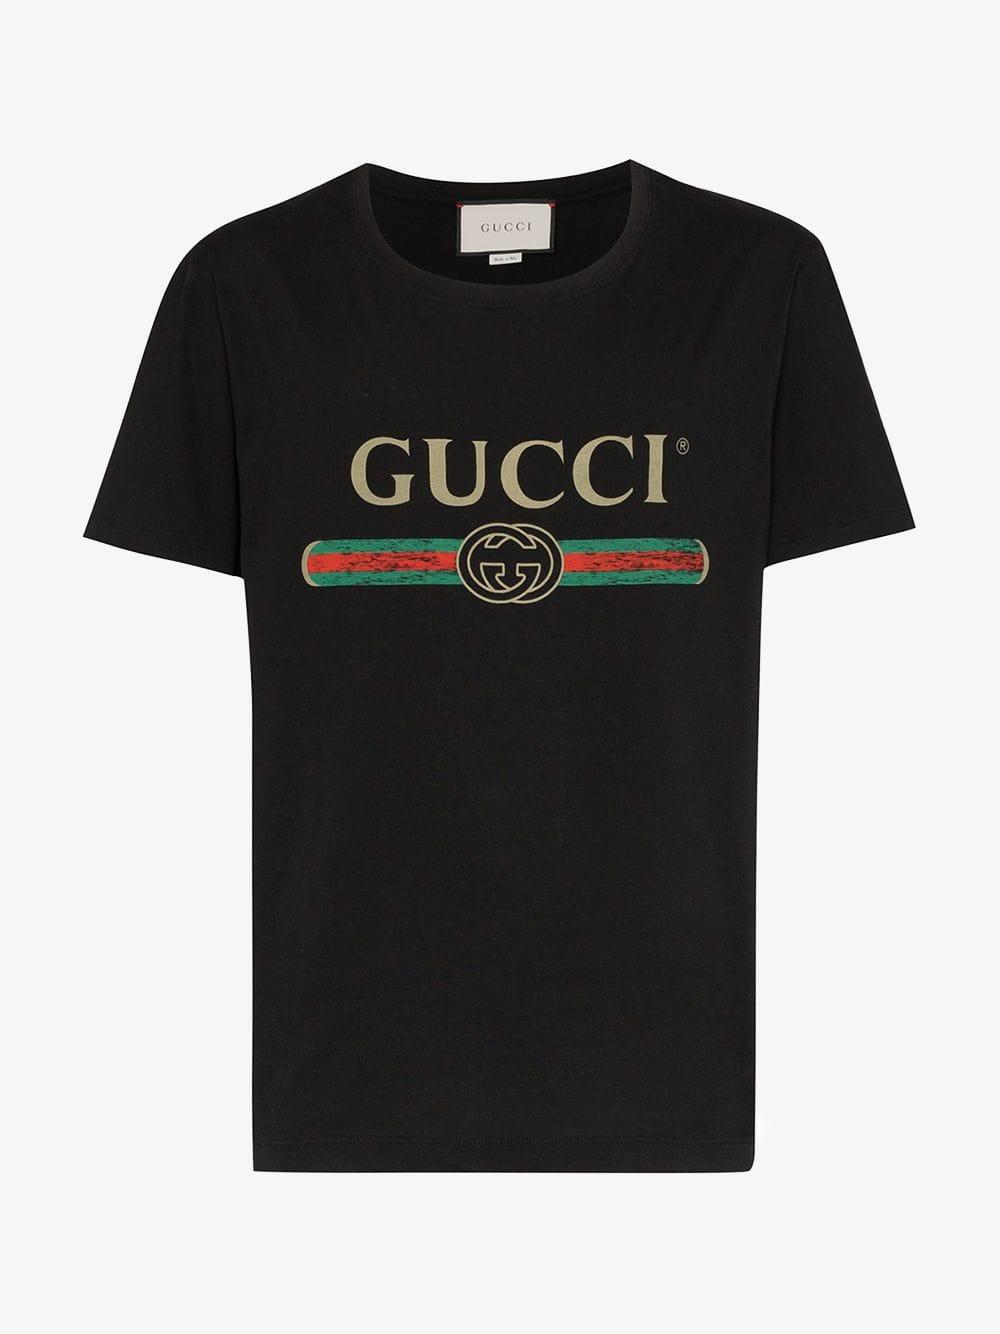 Gucci Cotton Distressed Fake Logo T Shirt in Black for Men - Save 41% | Lyst